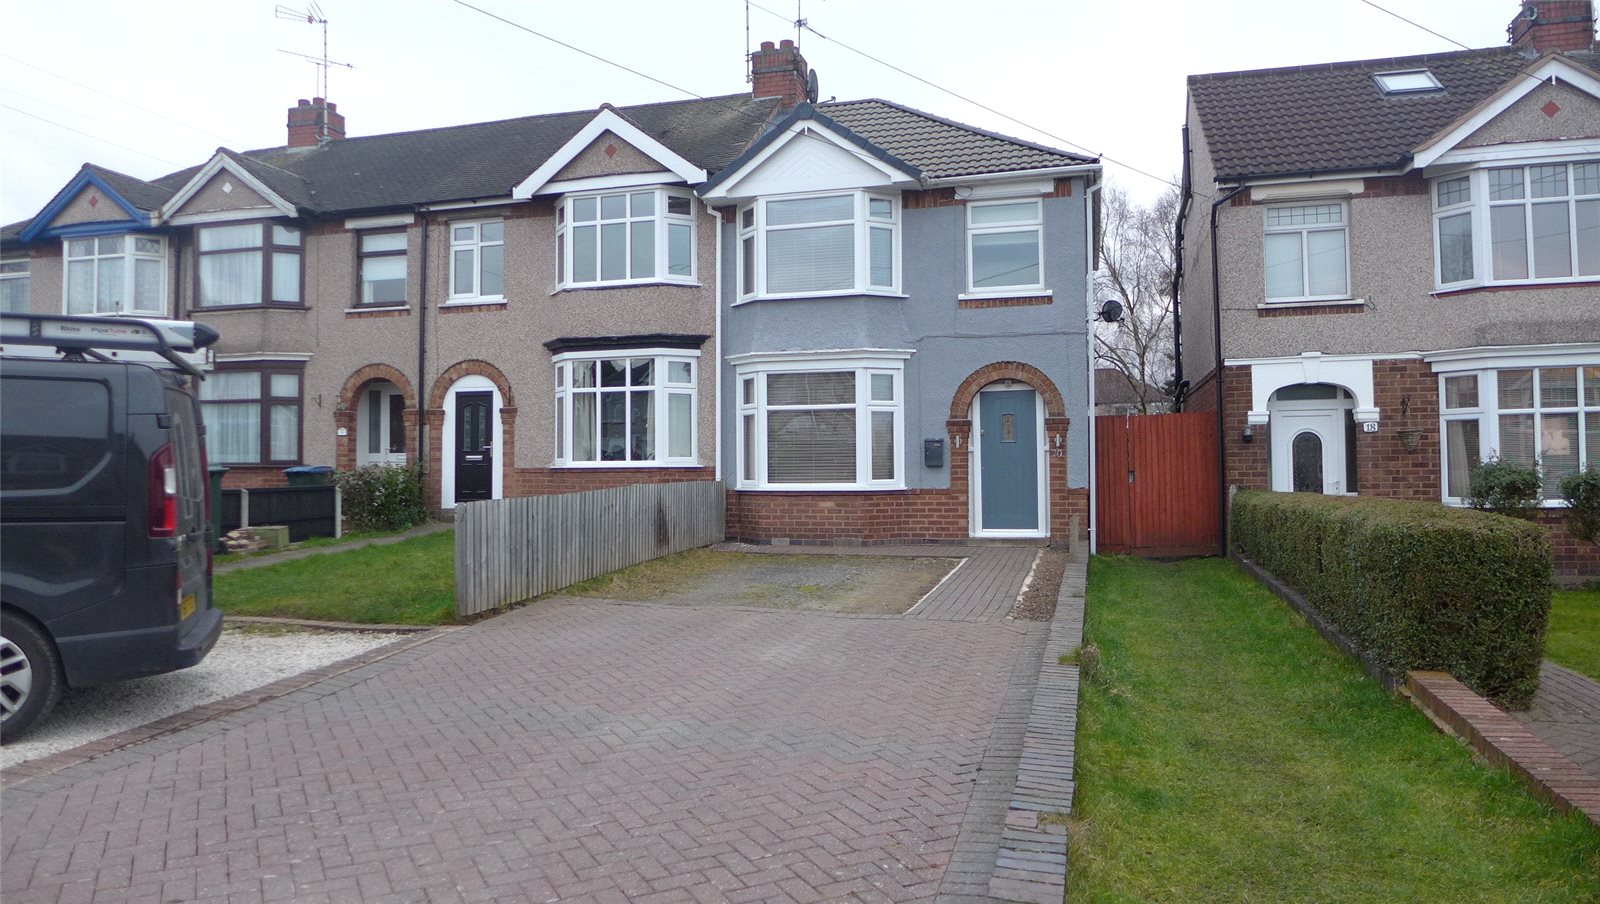 3 bedroom house in coventry